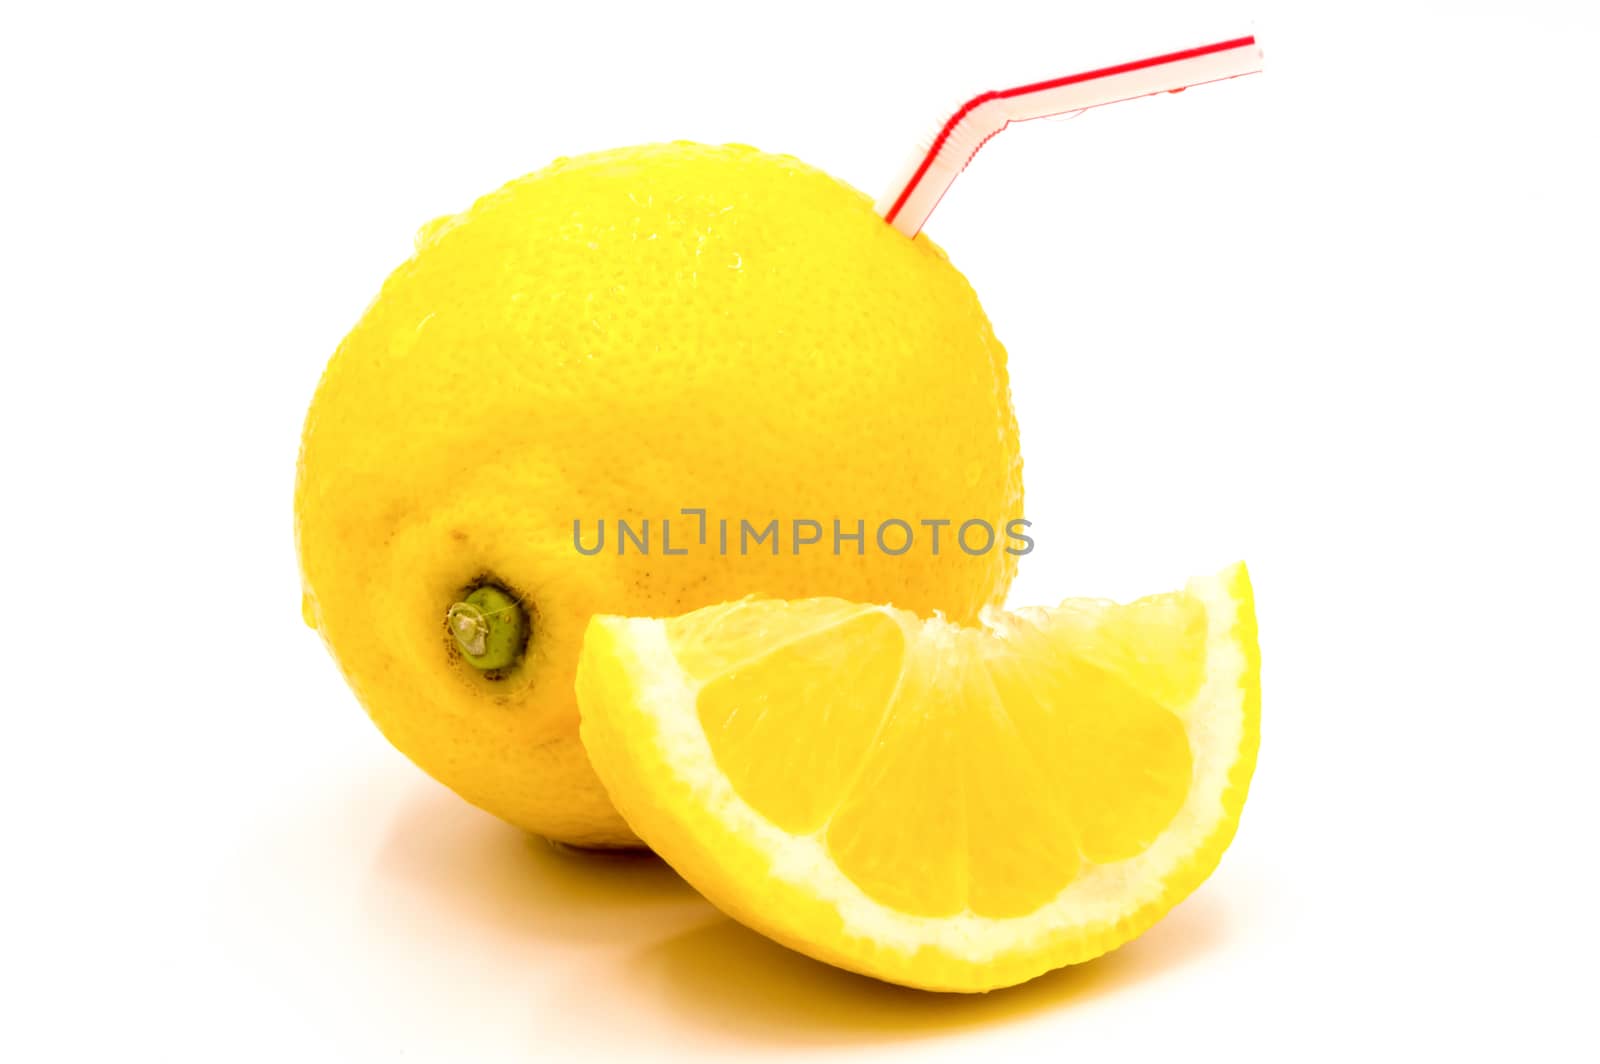 Isolated lemon juice. A whole and a half of lemon with straw, concept of natural fresh fruit juice isolated on white background with clipping path